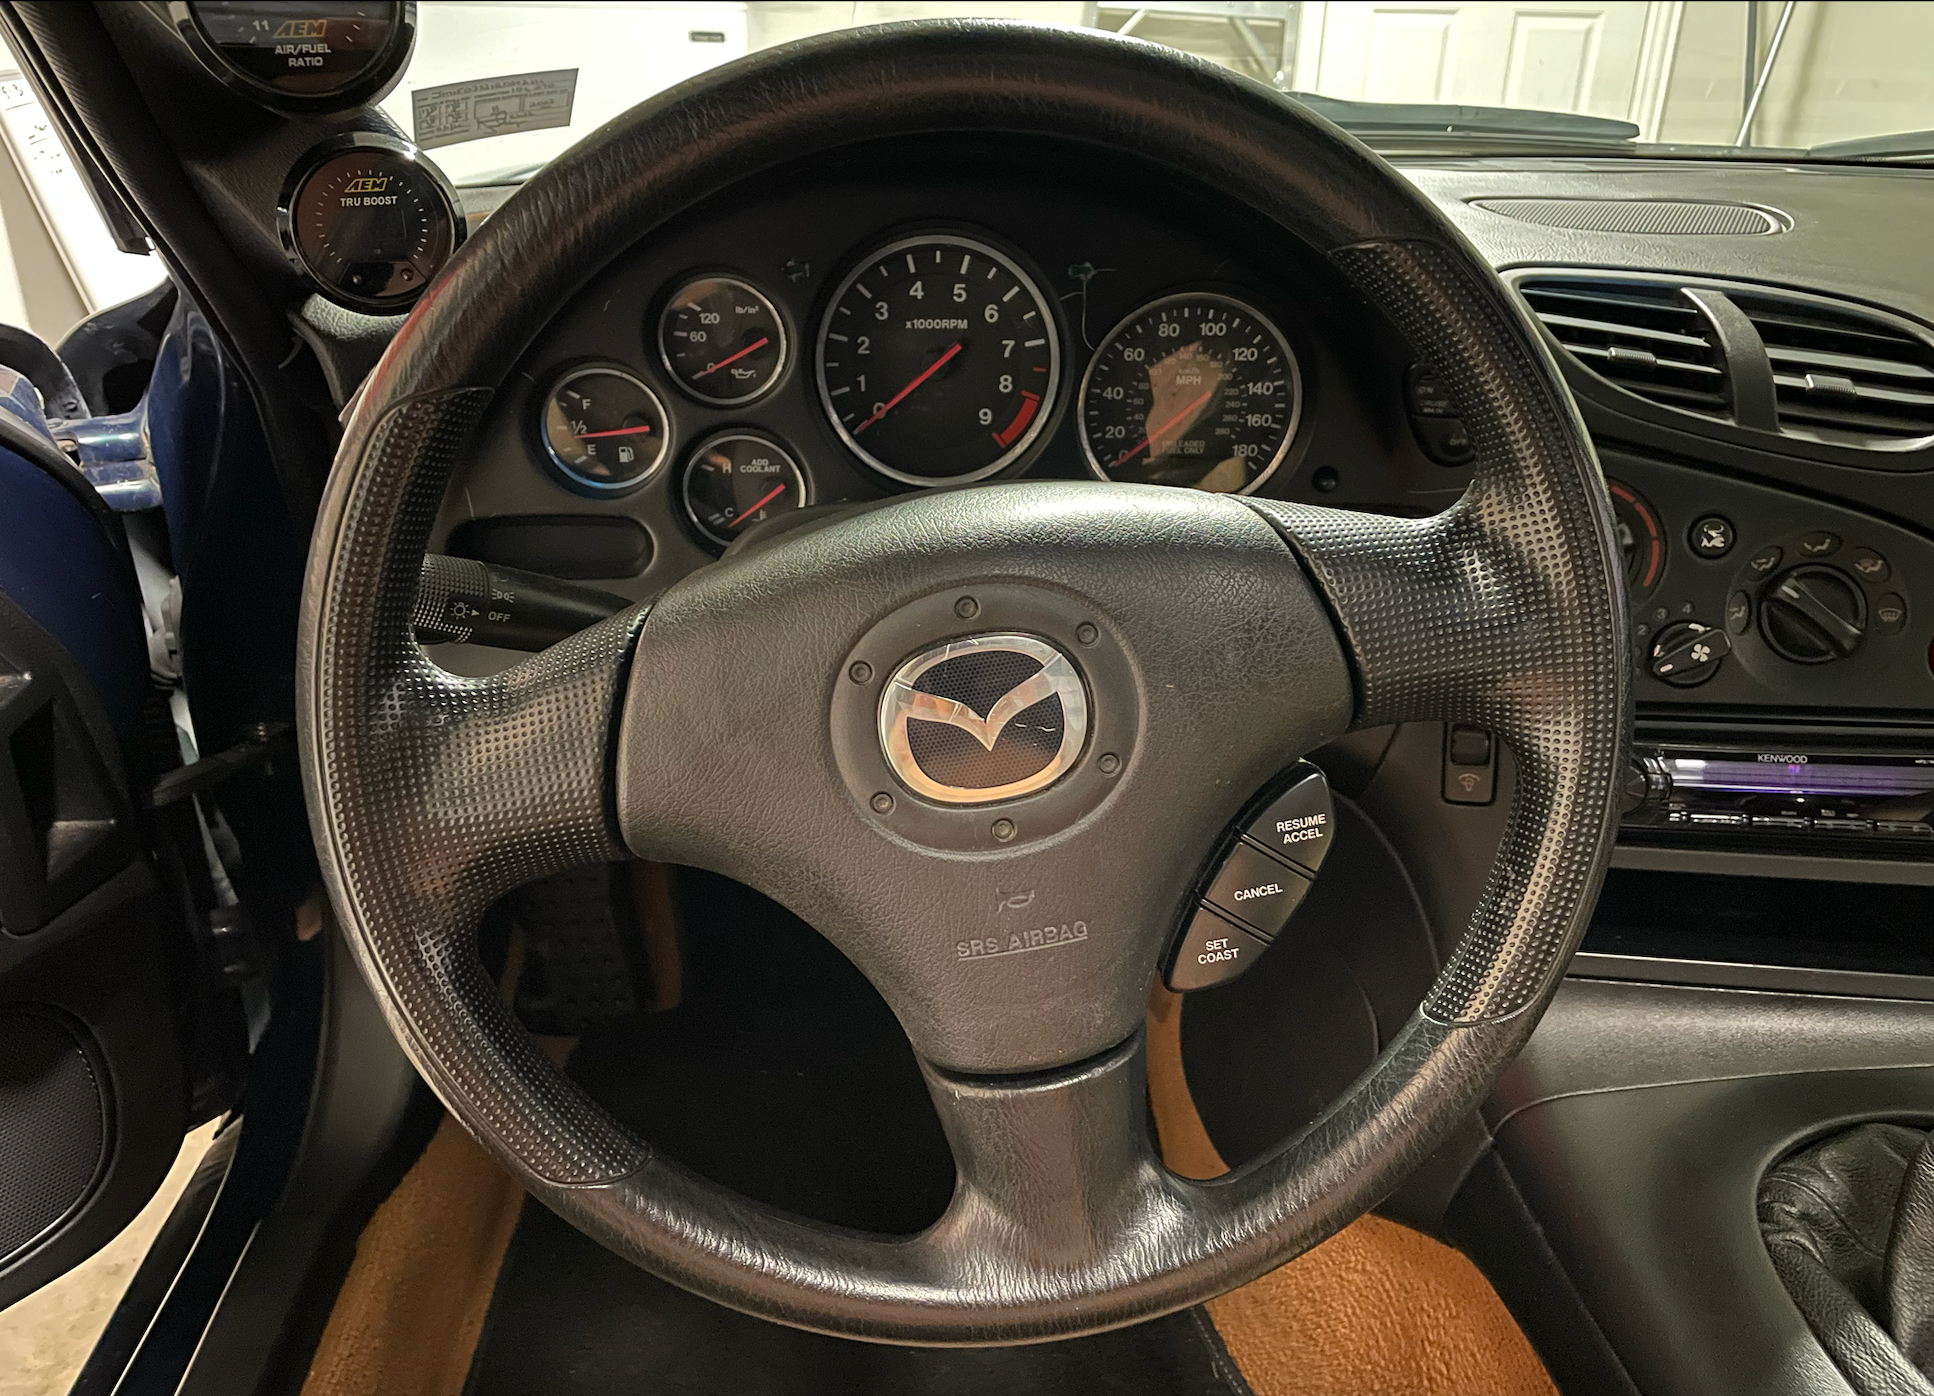 Interior/Upholstery - Mazda RX-7 Steering Wheel w/ Cruise Control - Used - 1993 to 2002 Mazda RX-7 - Fort Worth, TX 76111, United States